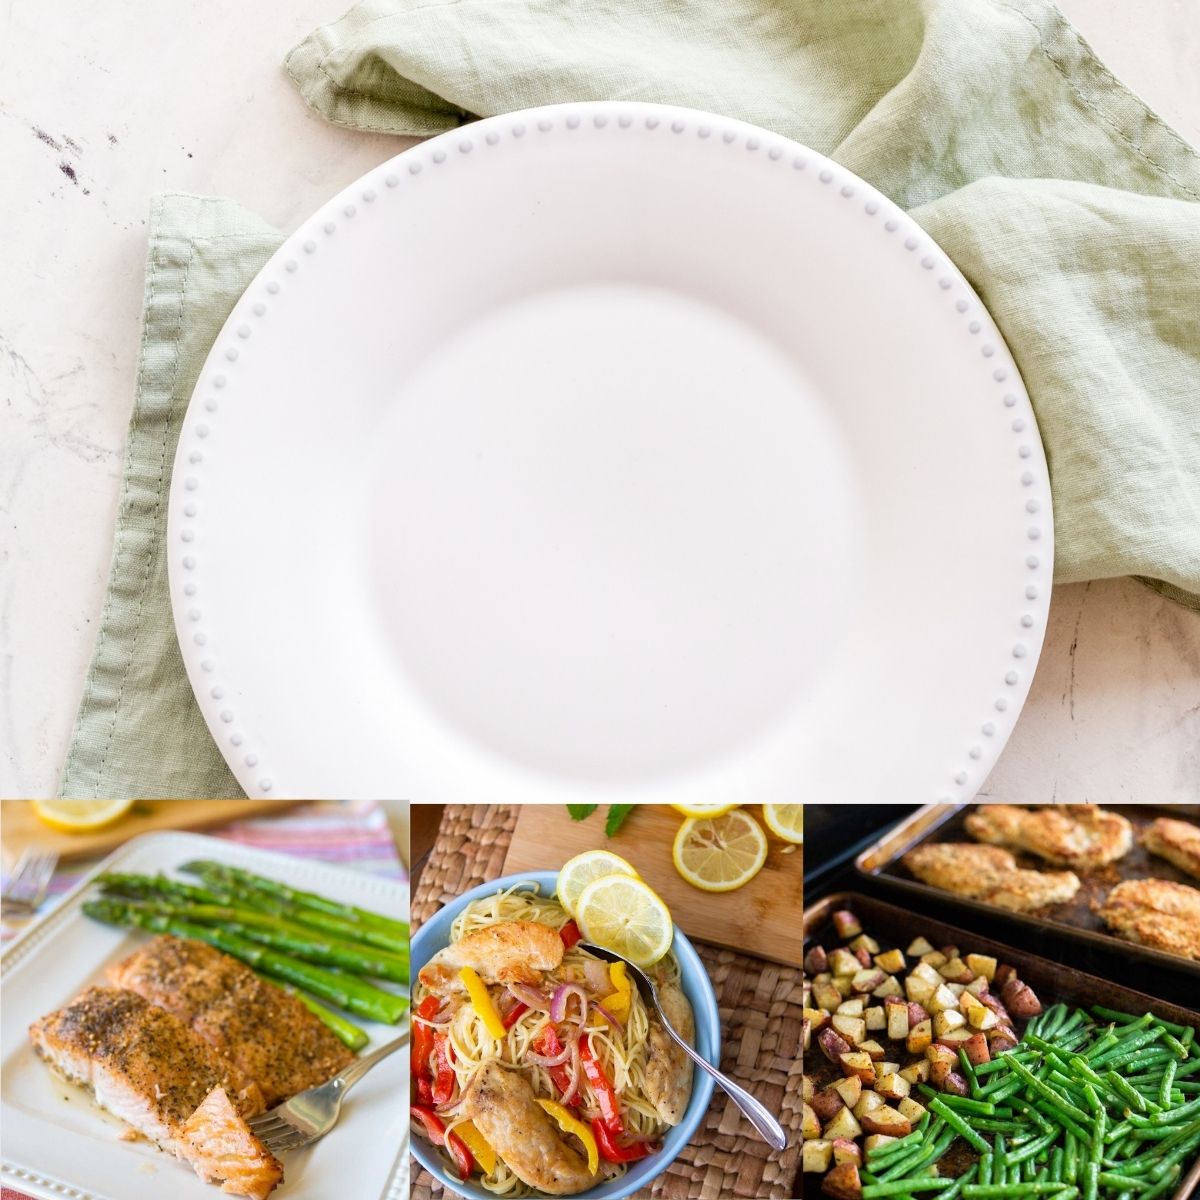 A simple dinner plate with everyday food photos below.